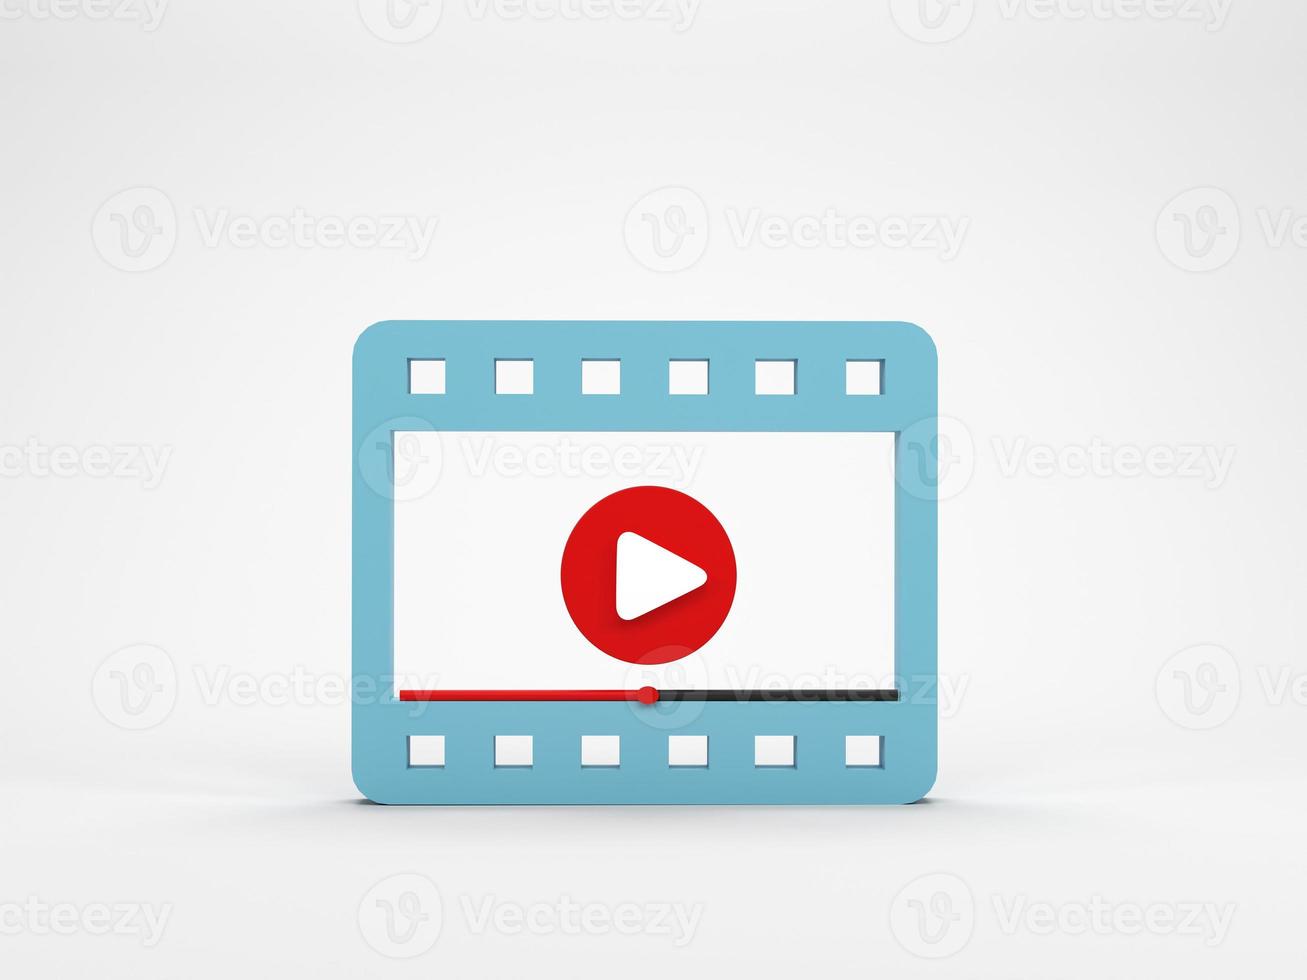 3D rendering, 3D illustration. Blue play video icon isolated on white background. Minimal film cinema play icon. Concept of video player, web page, play button or streaming photo